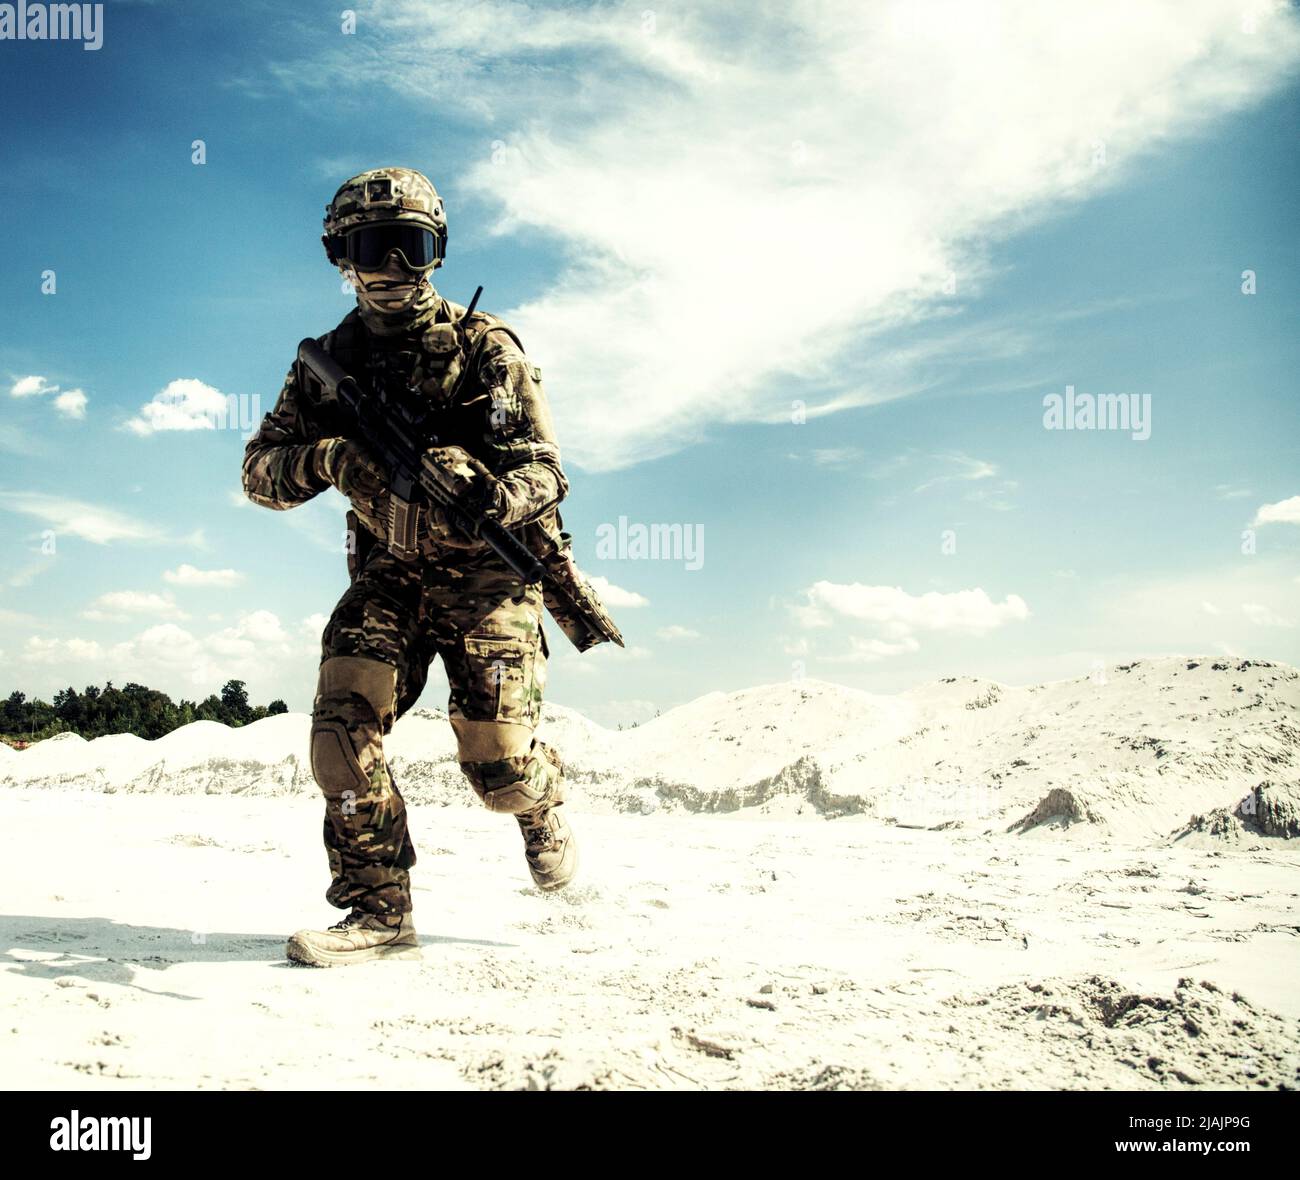 Serviceman running with service rifle in sandy area during military operation. Stock Photo